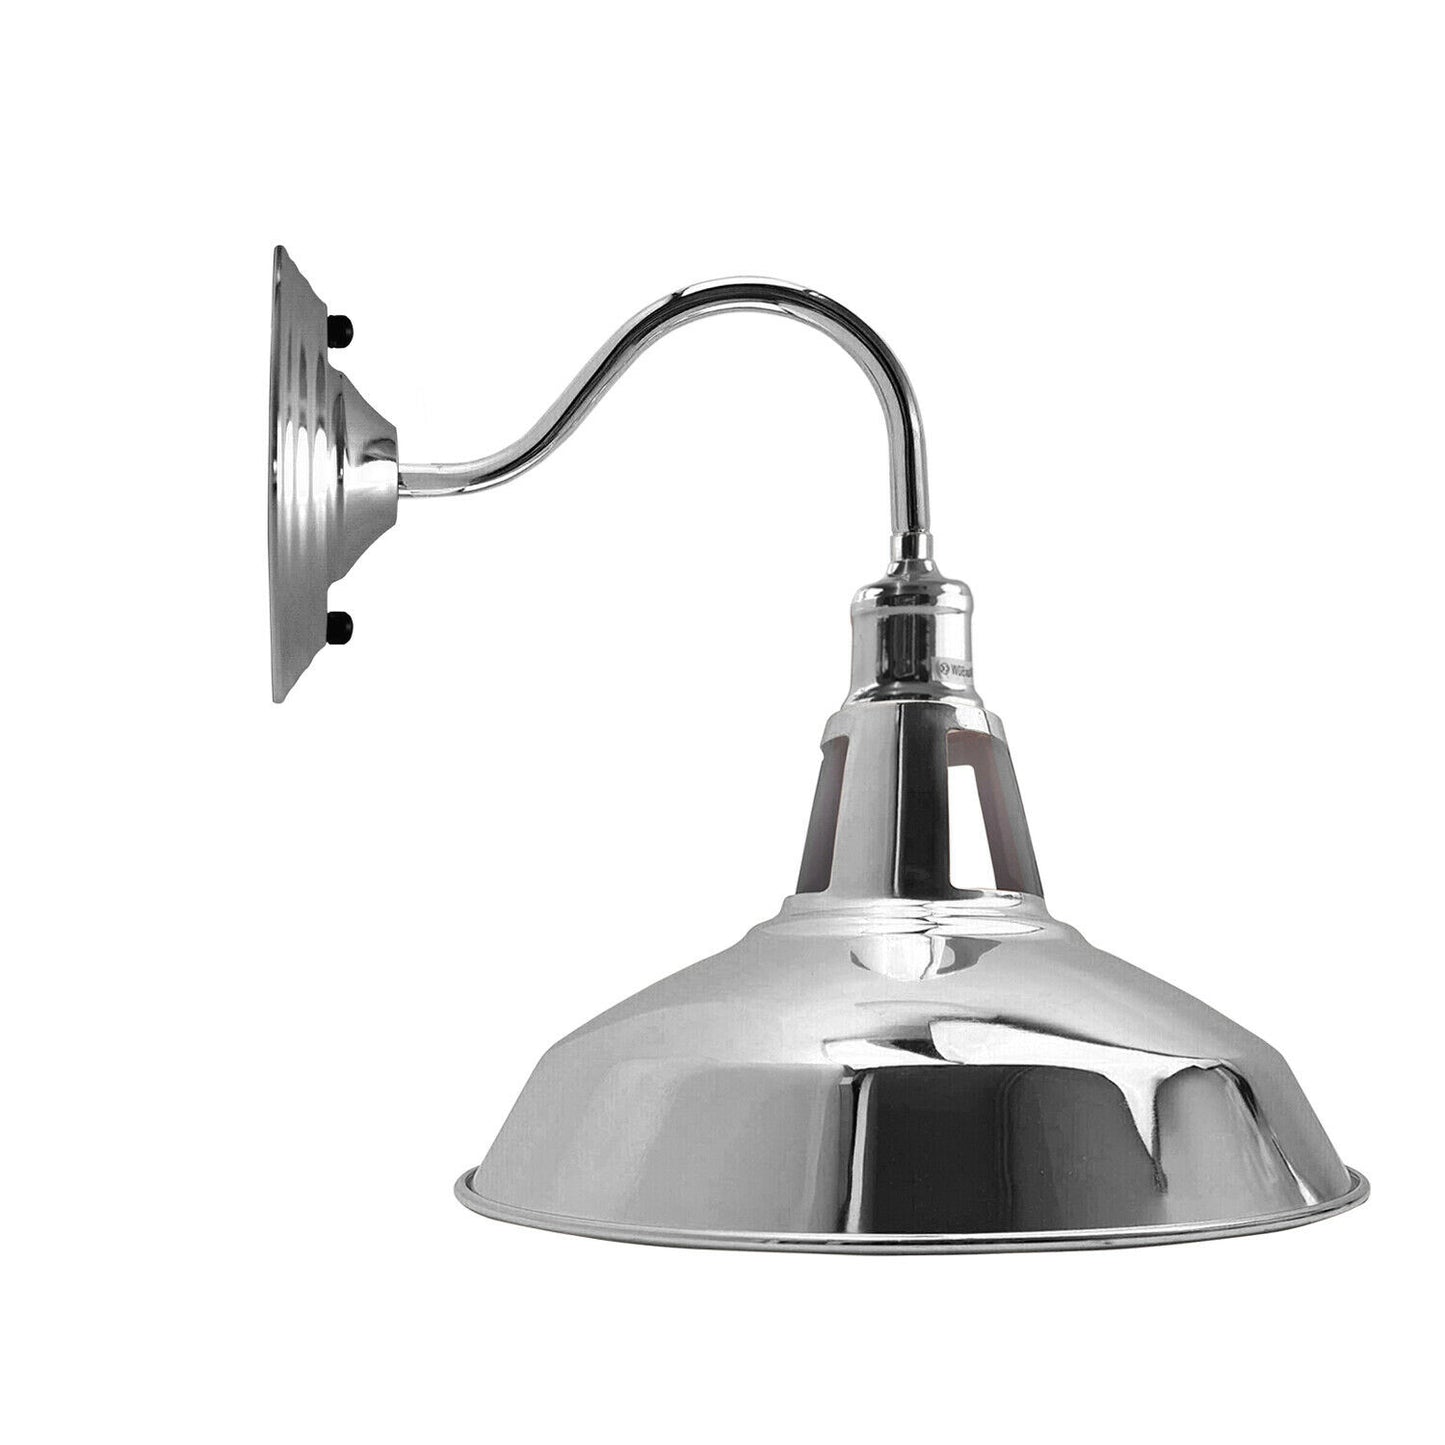 Modern Style High Polished Chrome Wall Sconce with Vintage Retro Industrial Wall Light Shade